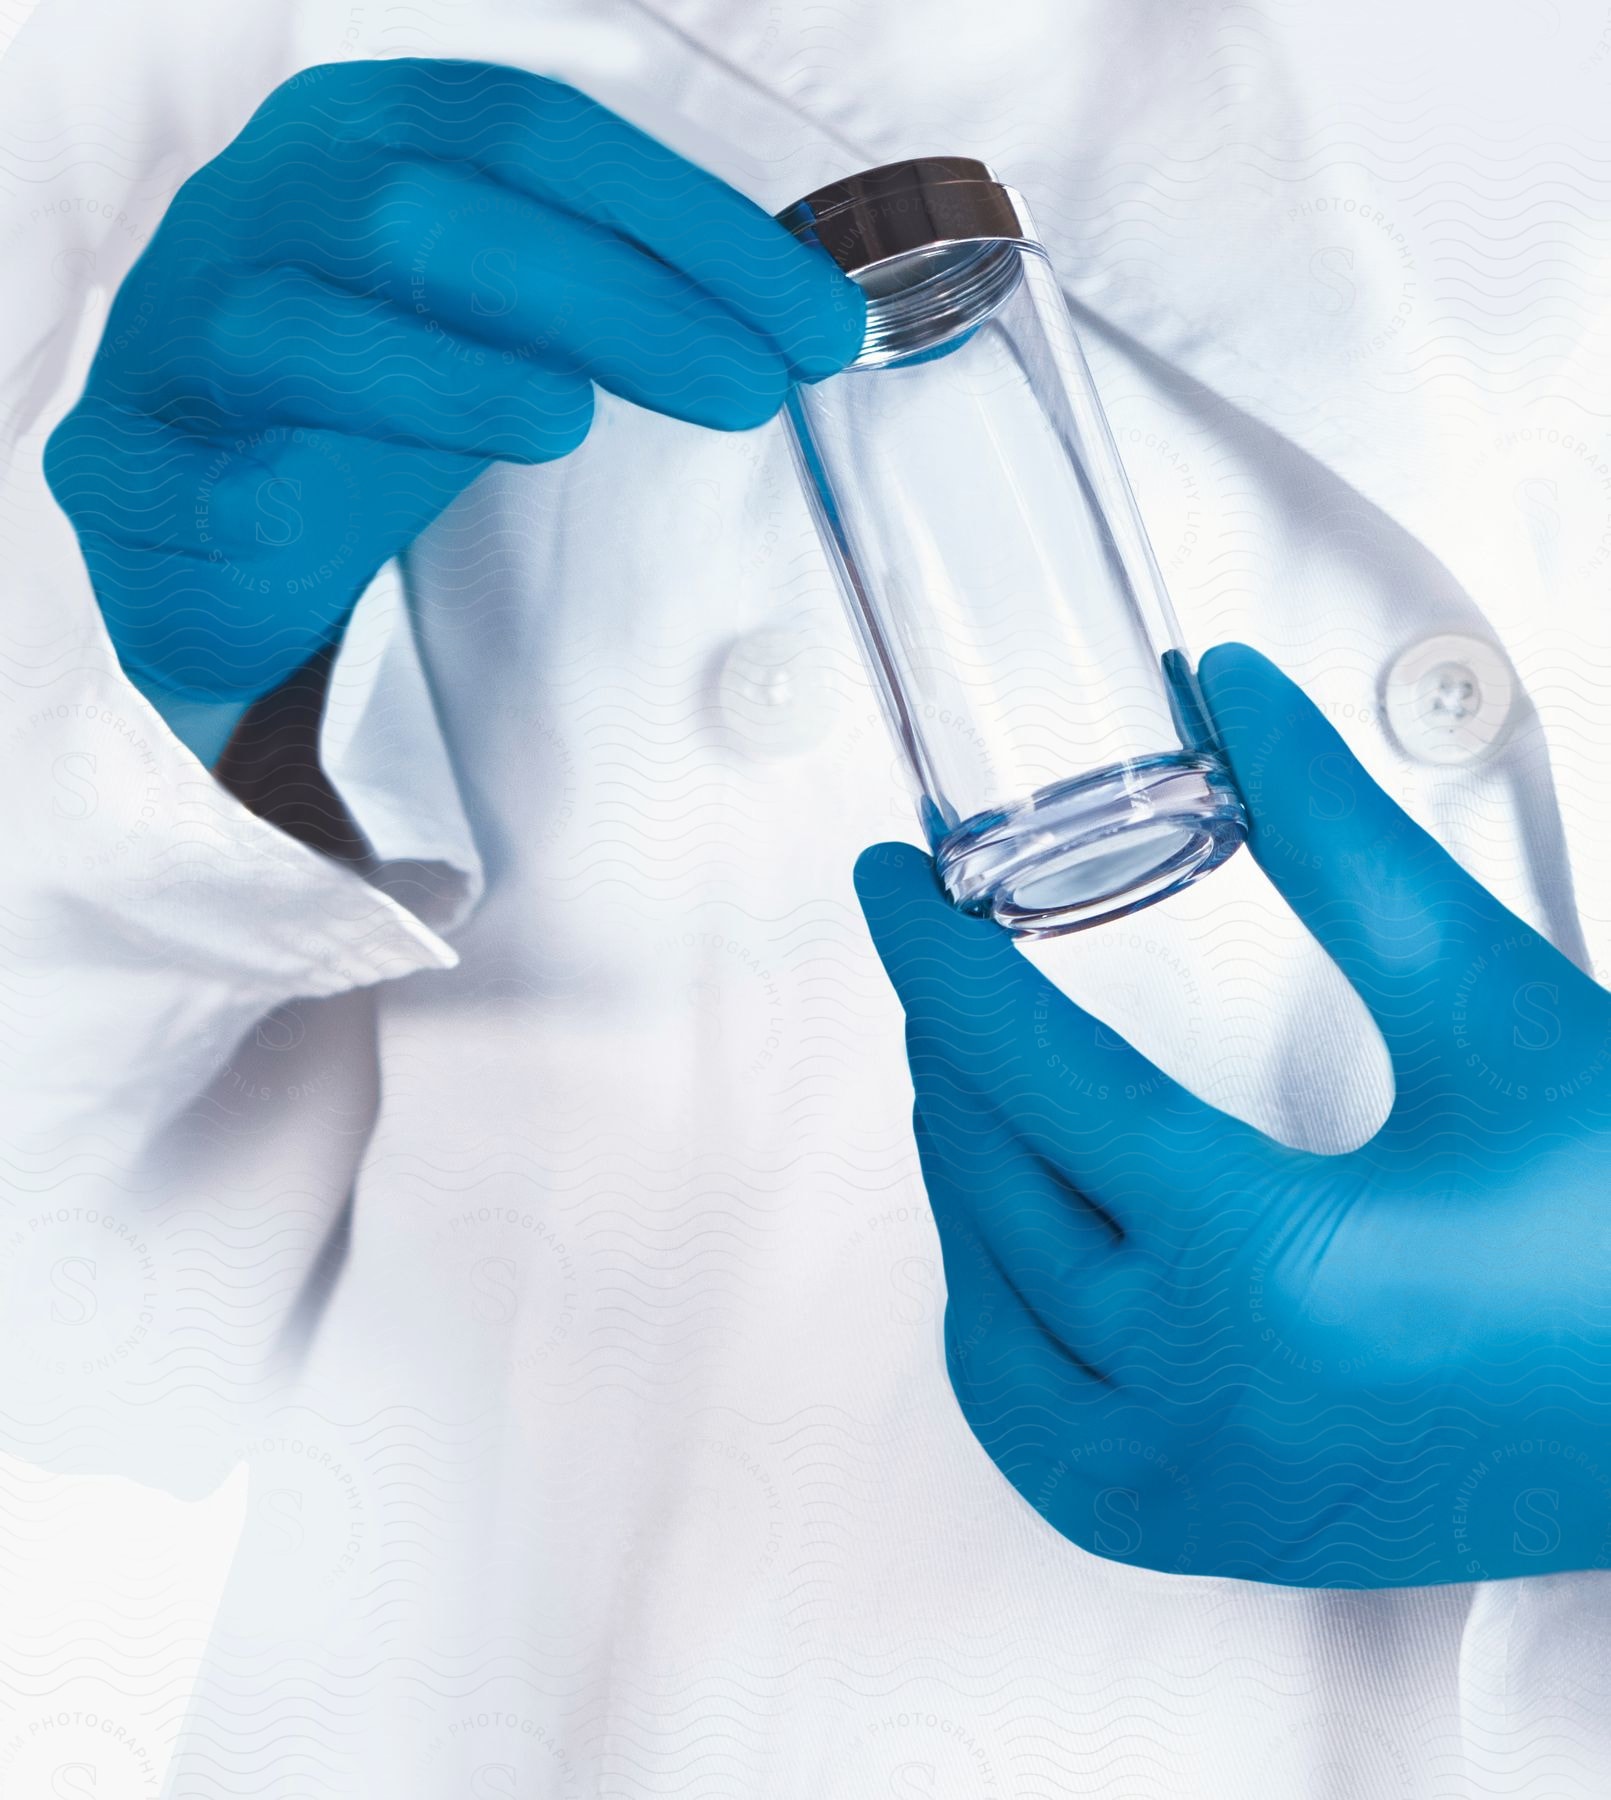 A Person In A Lab Coat And, Stock Image 159245